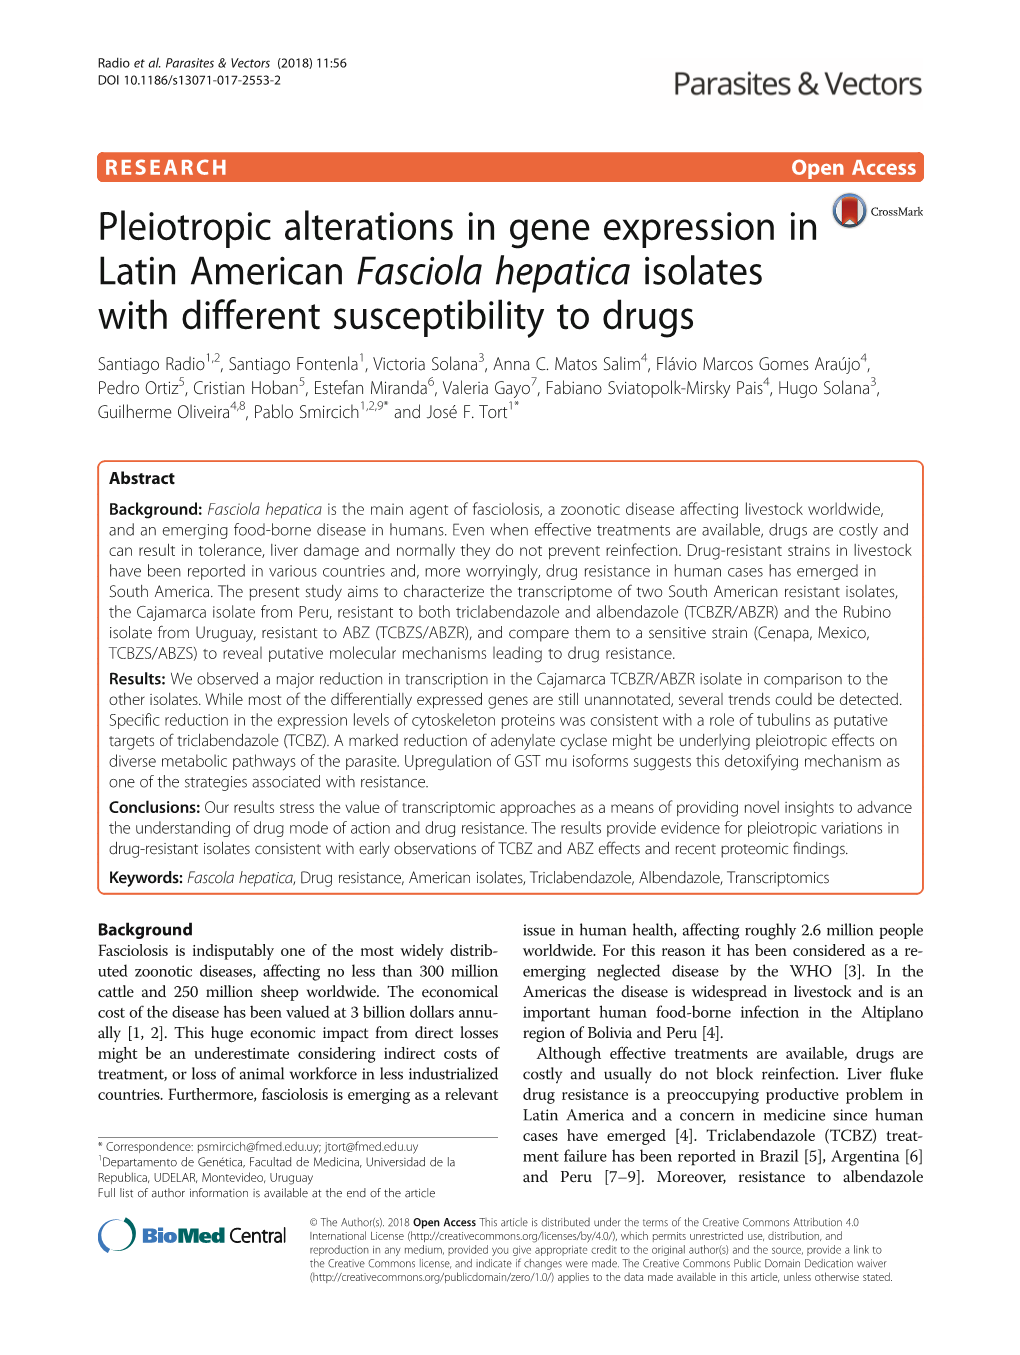 Pleiotropic Alterations in Gene Expression in Latin American Fasciola Hepatica Isolates with Different Susceptibility to Drugs